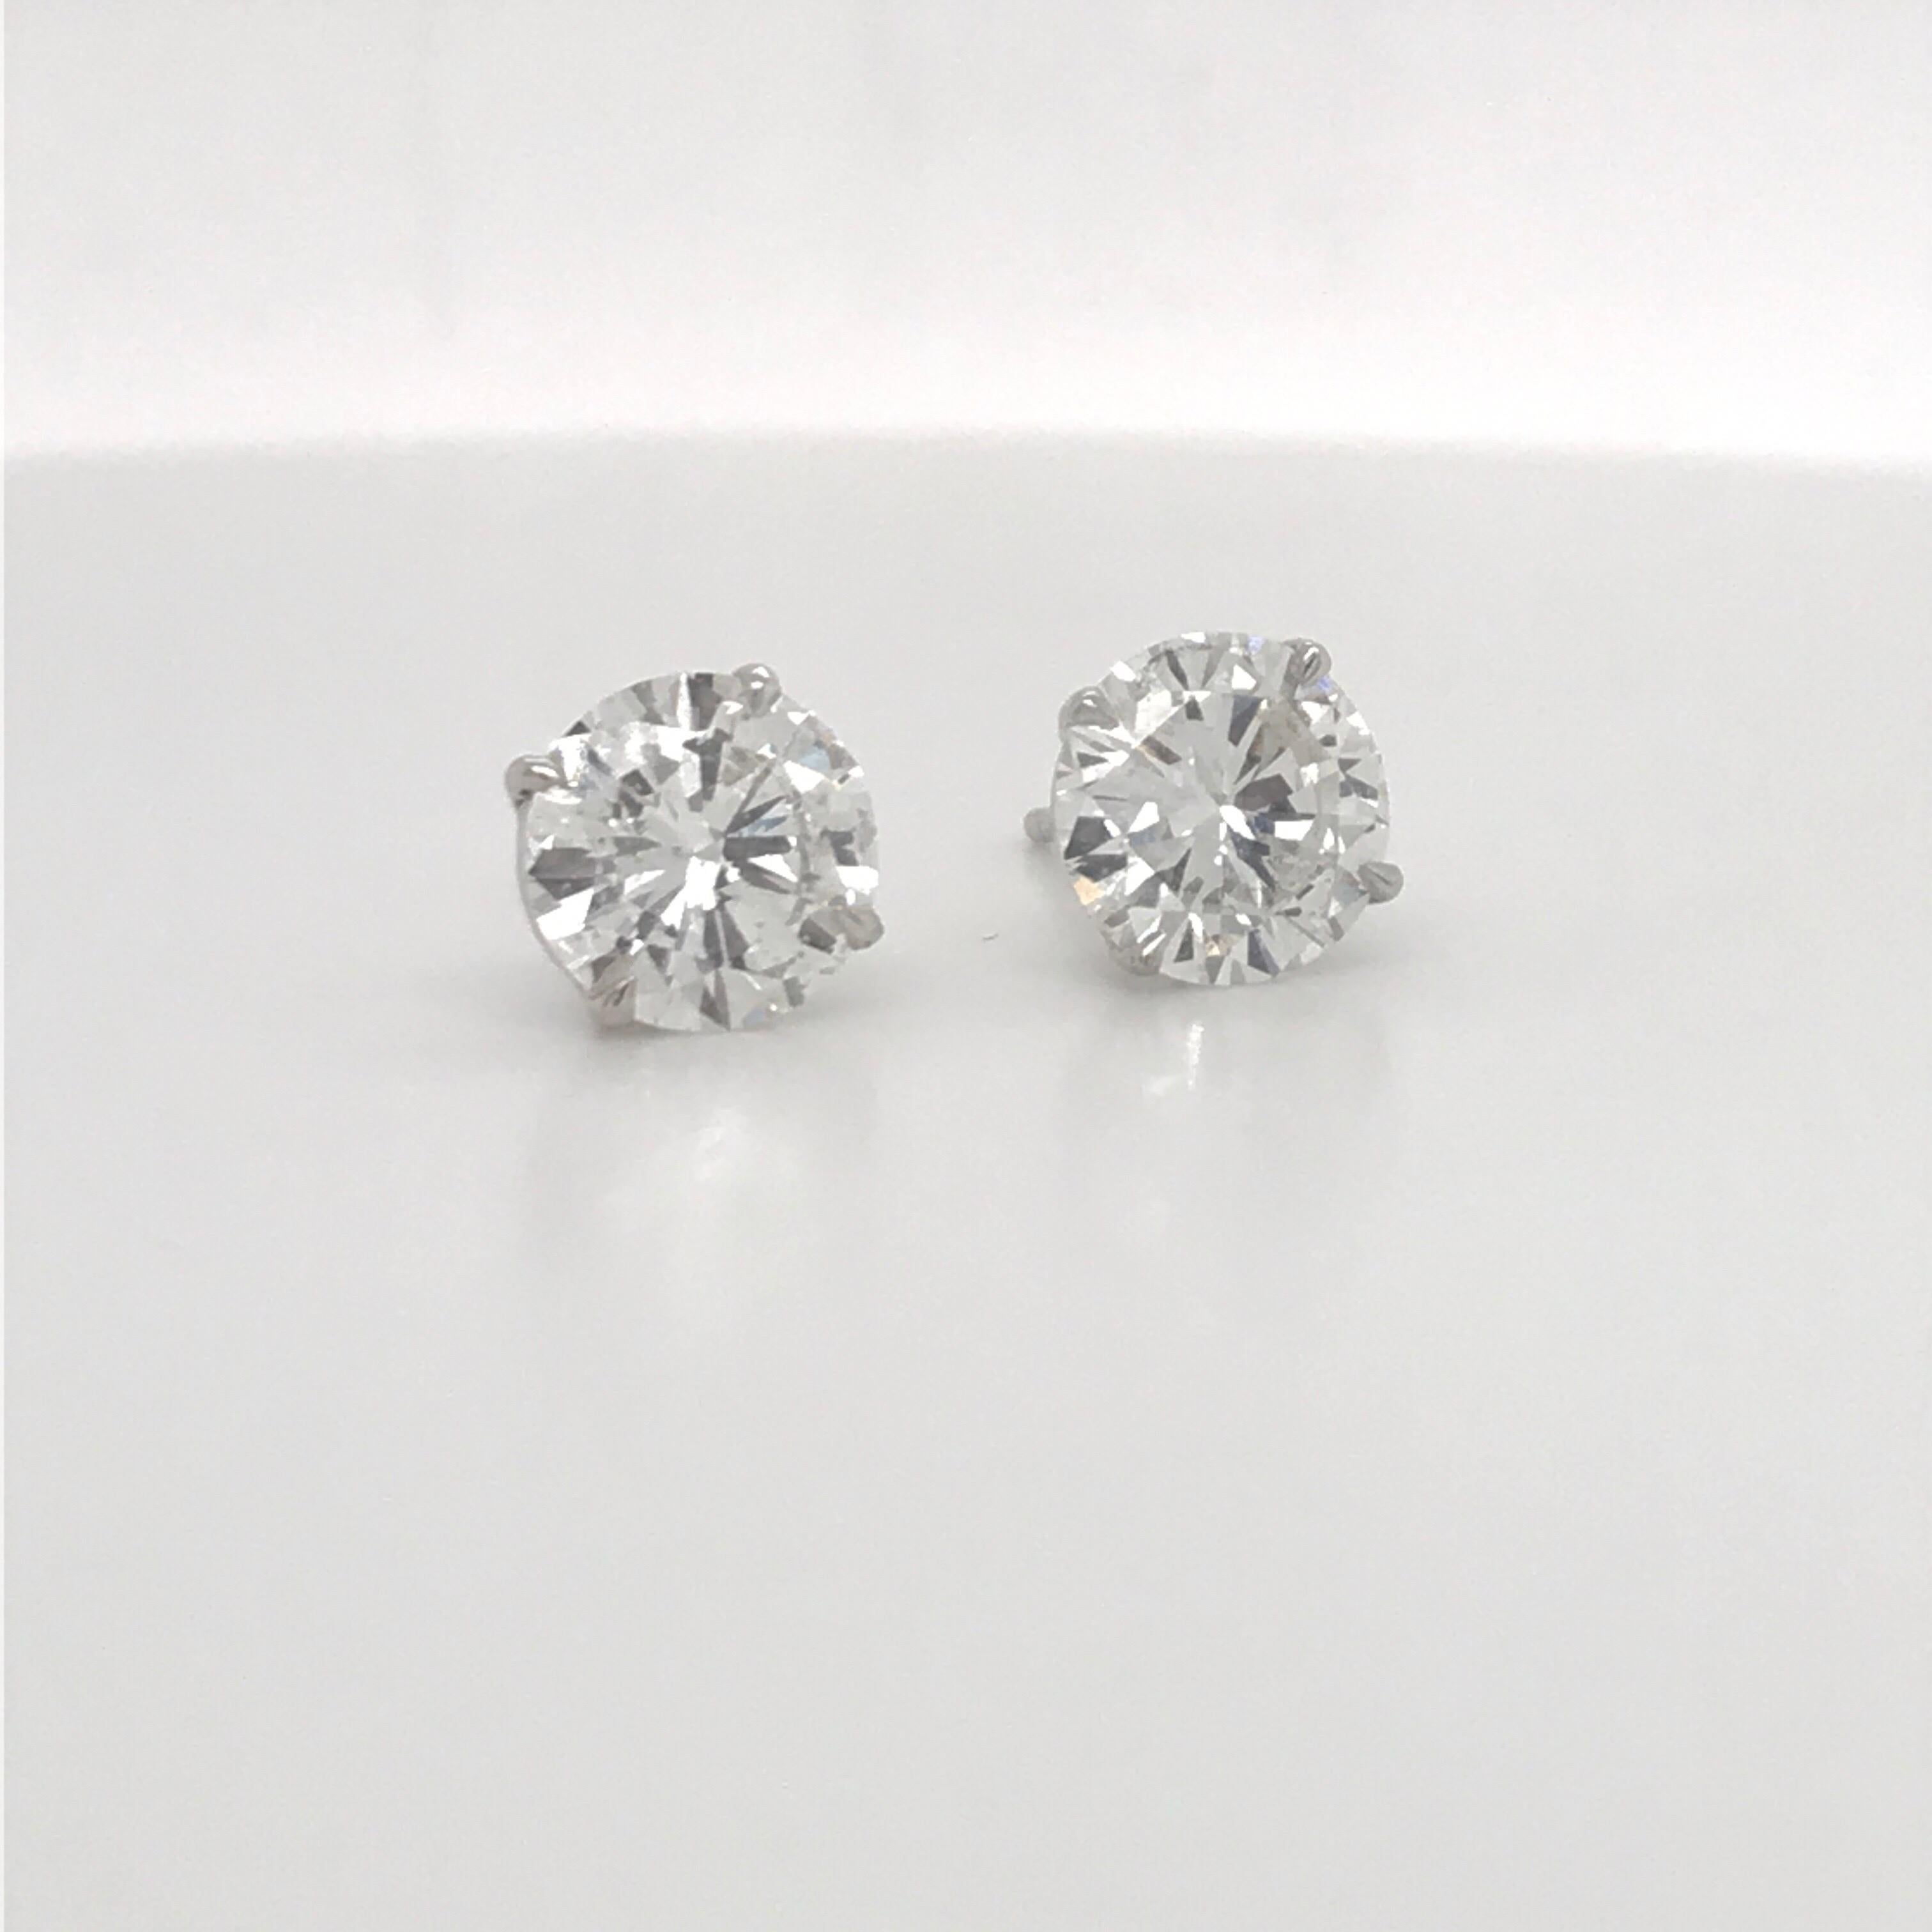 GIA Certified diamond stud earrings weighing 2.82 carats in a 4 prong champagne setting, 18k white gold.
Color H
Clarity SI2-I1